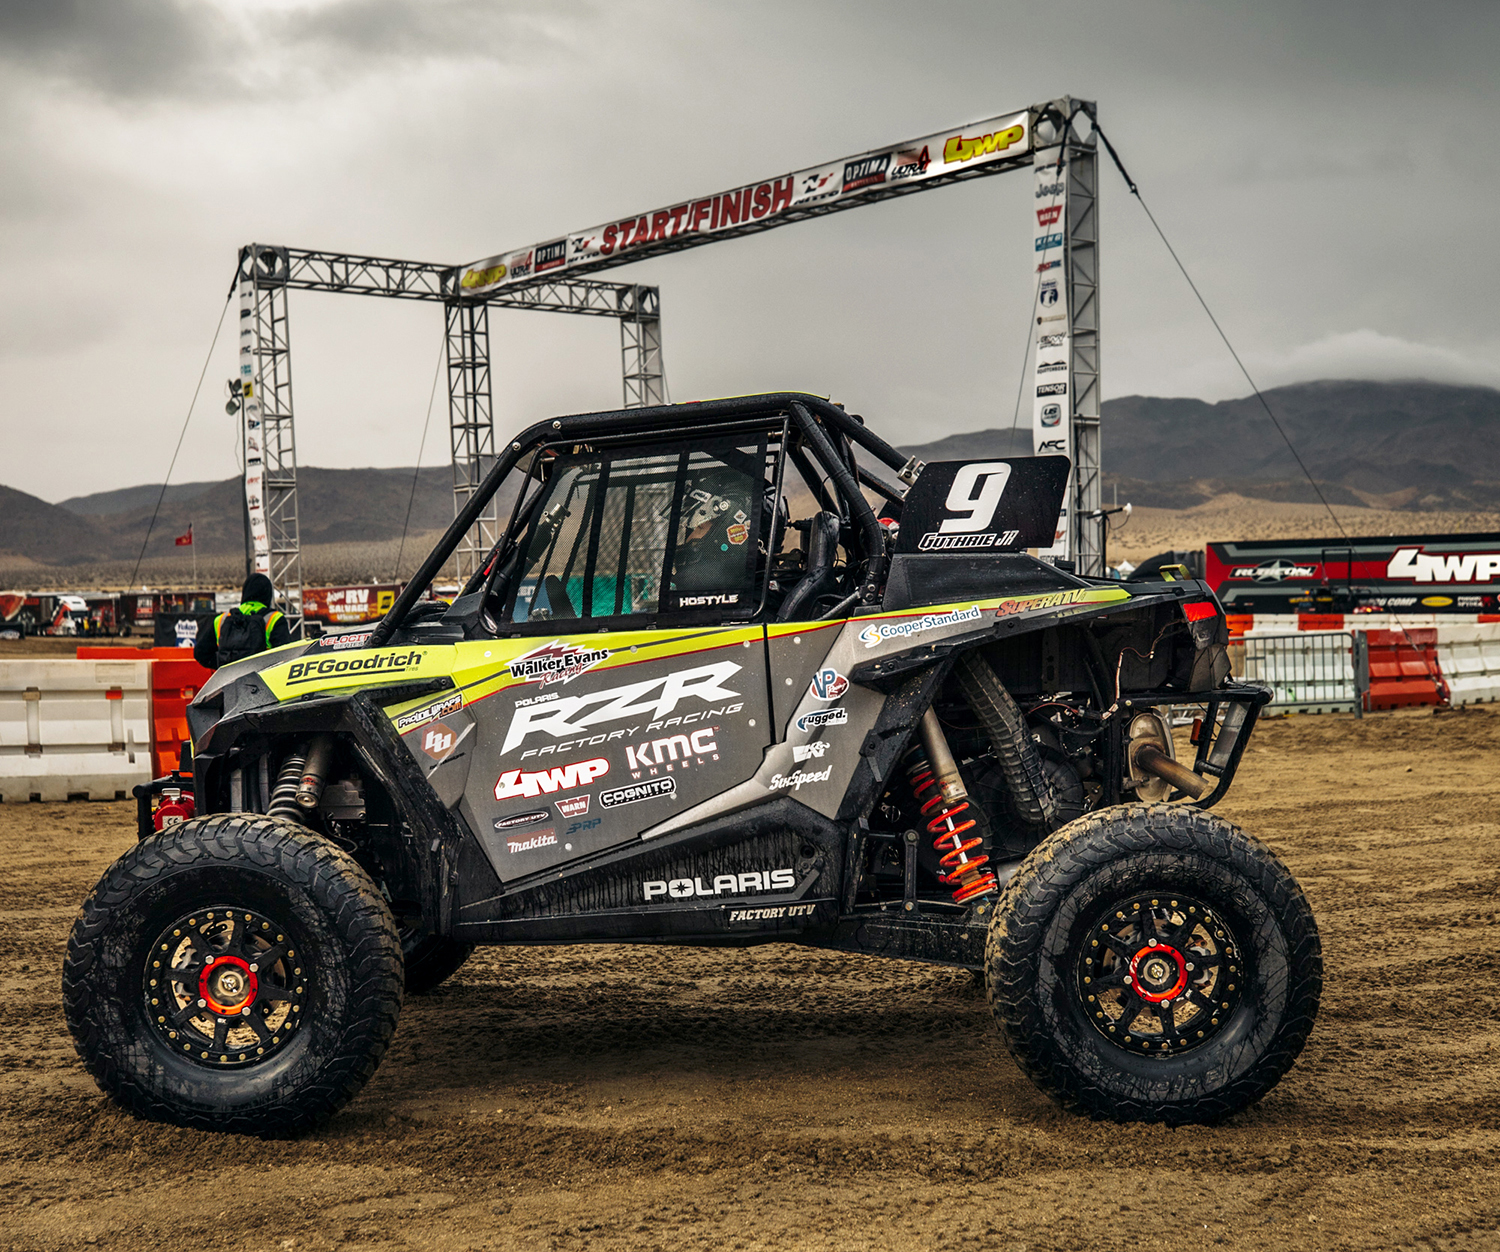 4 Wheel Parts’ Mitch Guthrie Jr. wins the 2019 Can-Am UTV King of the Hammers championship in a Polaris RZR Turbo-S Velocity Series with a stock powertrain.